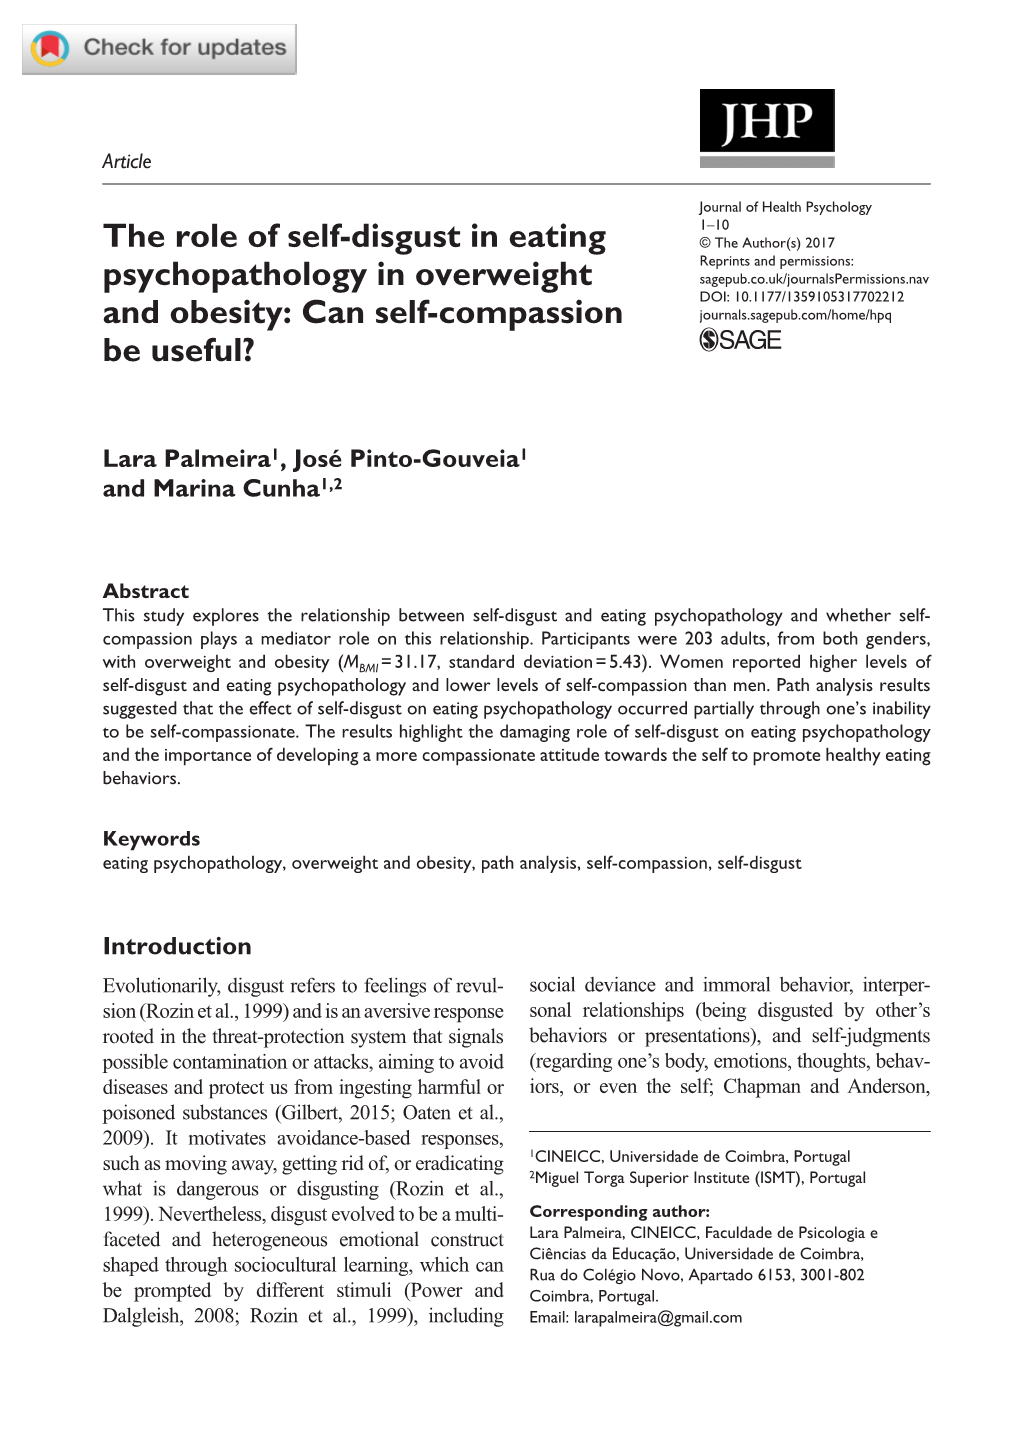 The Role of Self-Disgust in Eating Psychopathology in Overweight And